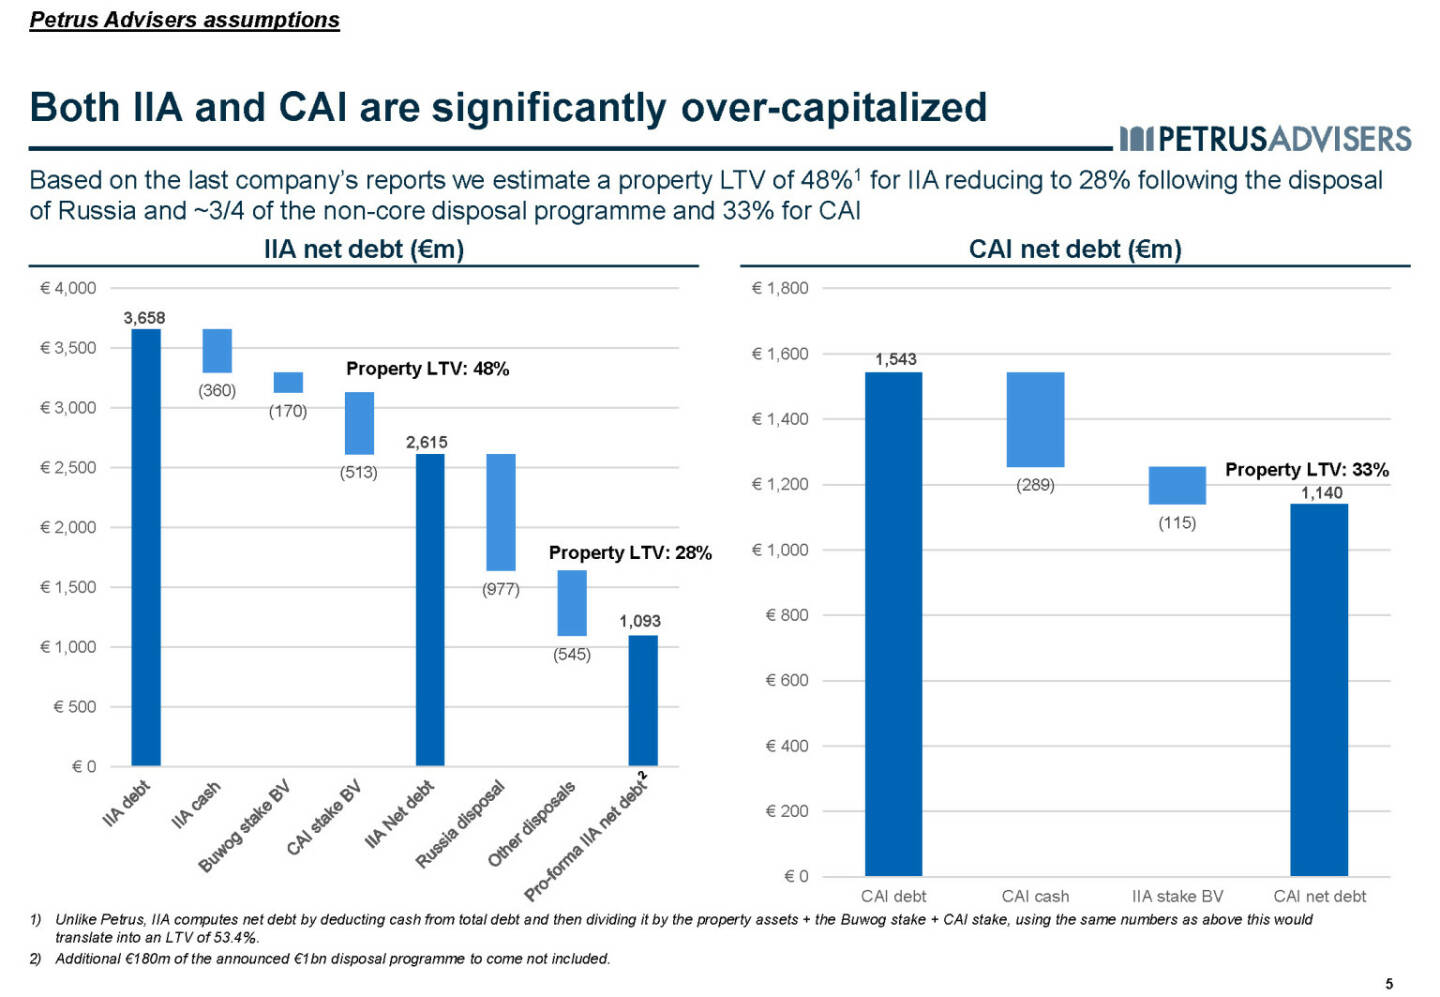 Both IIA and CAI are significantly over-capitalized - Petrus Advisers